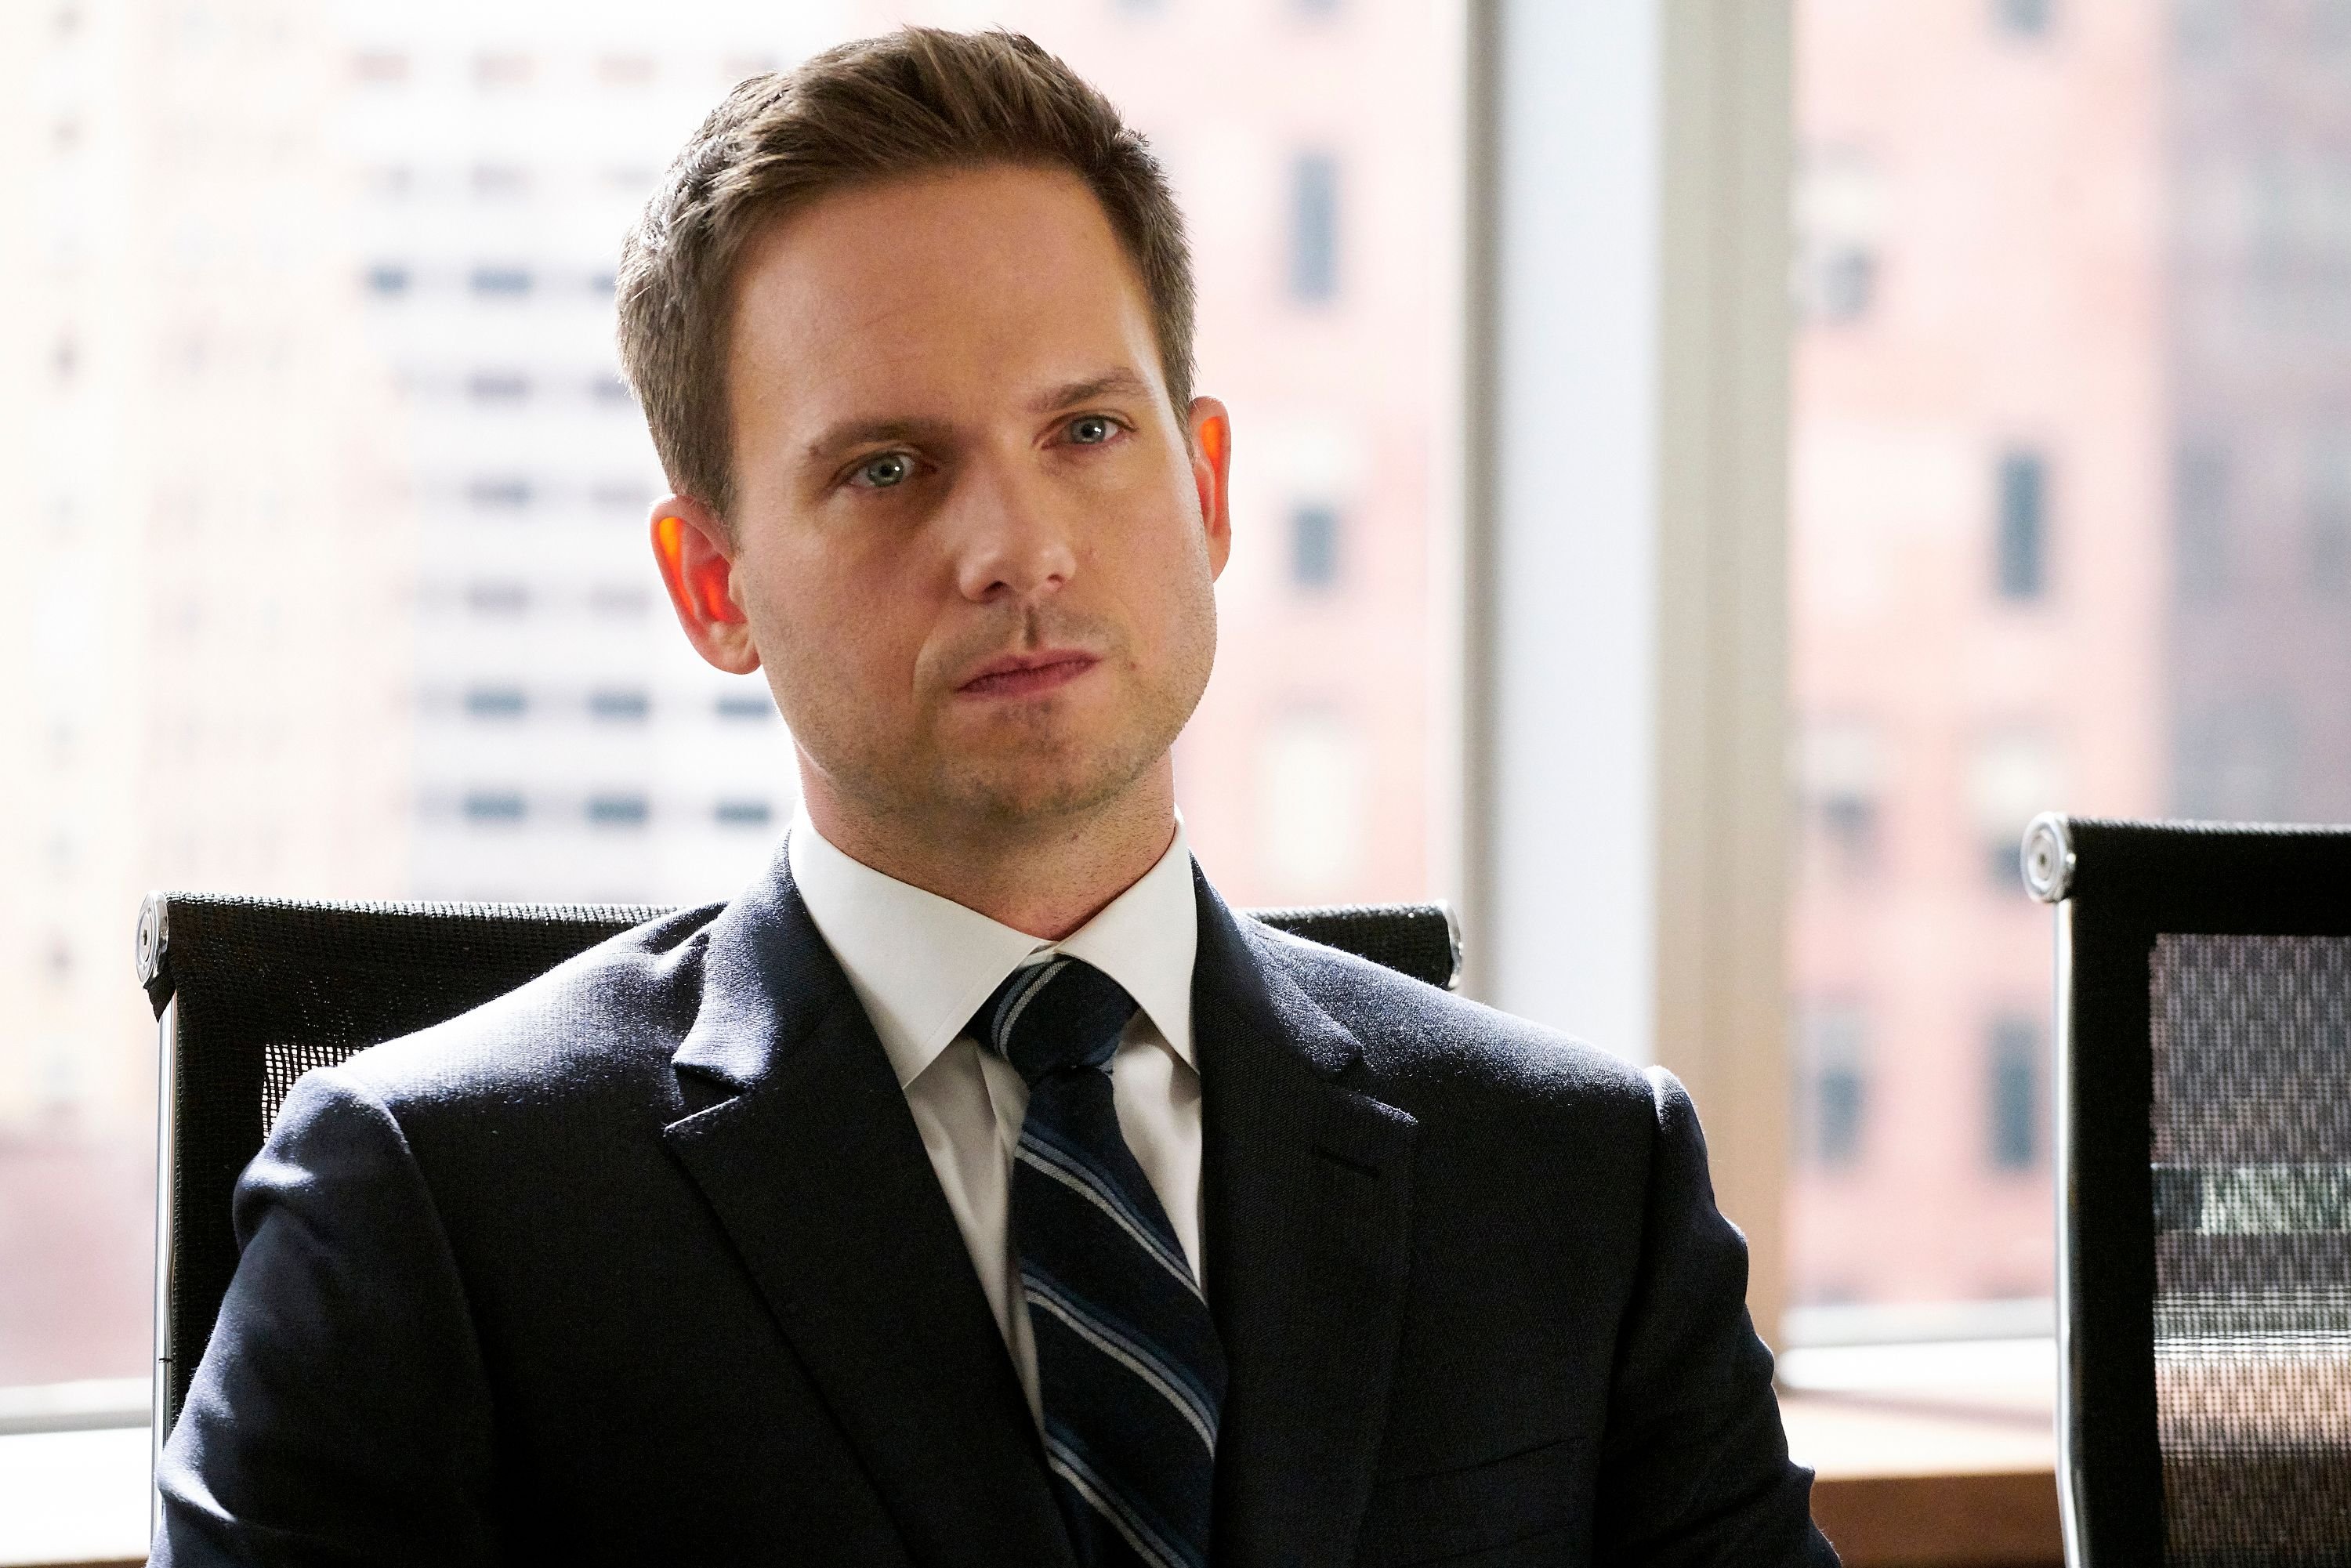 Patrick J. Adams as Mike Ross on the set of "Suits" | Source: Getty Images